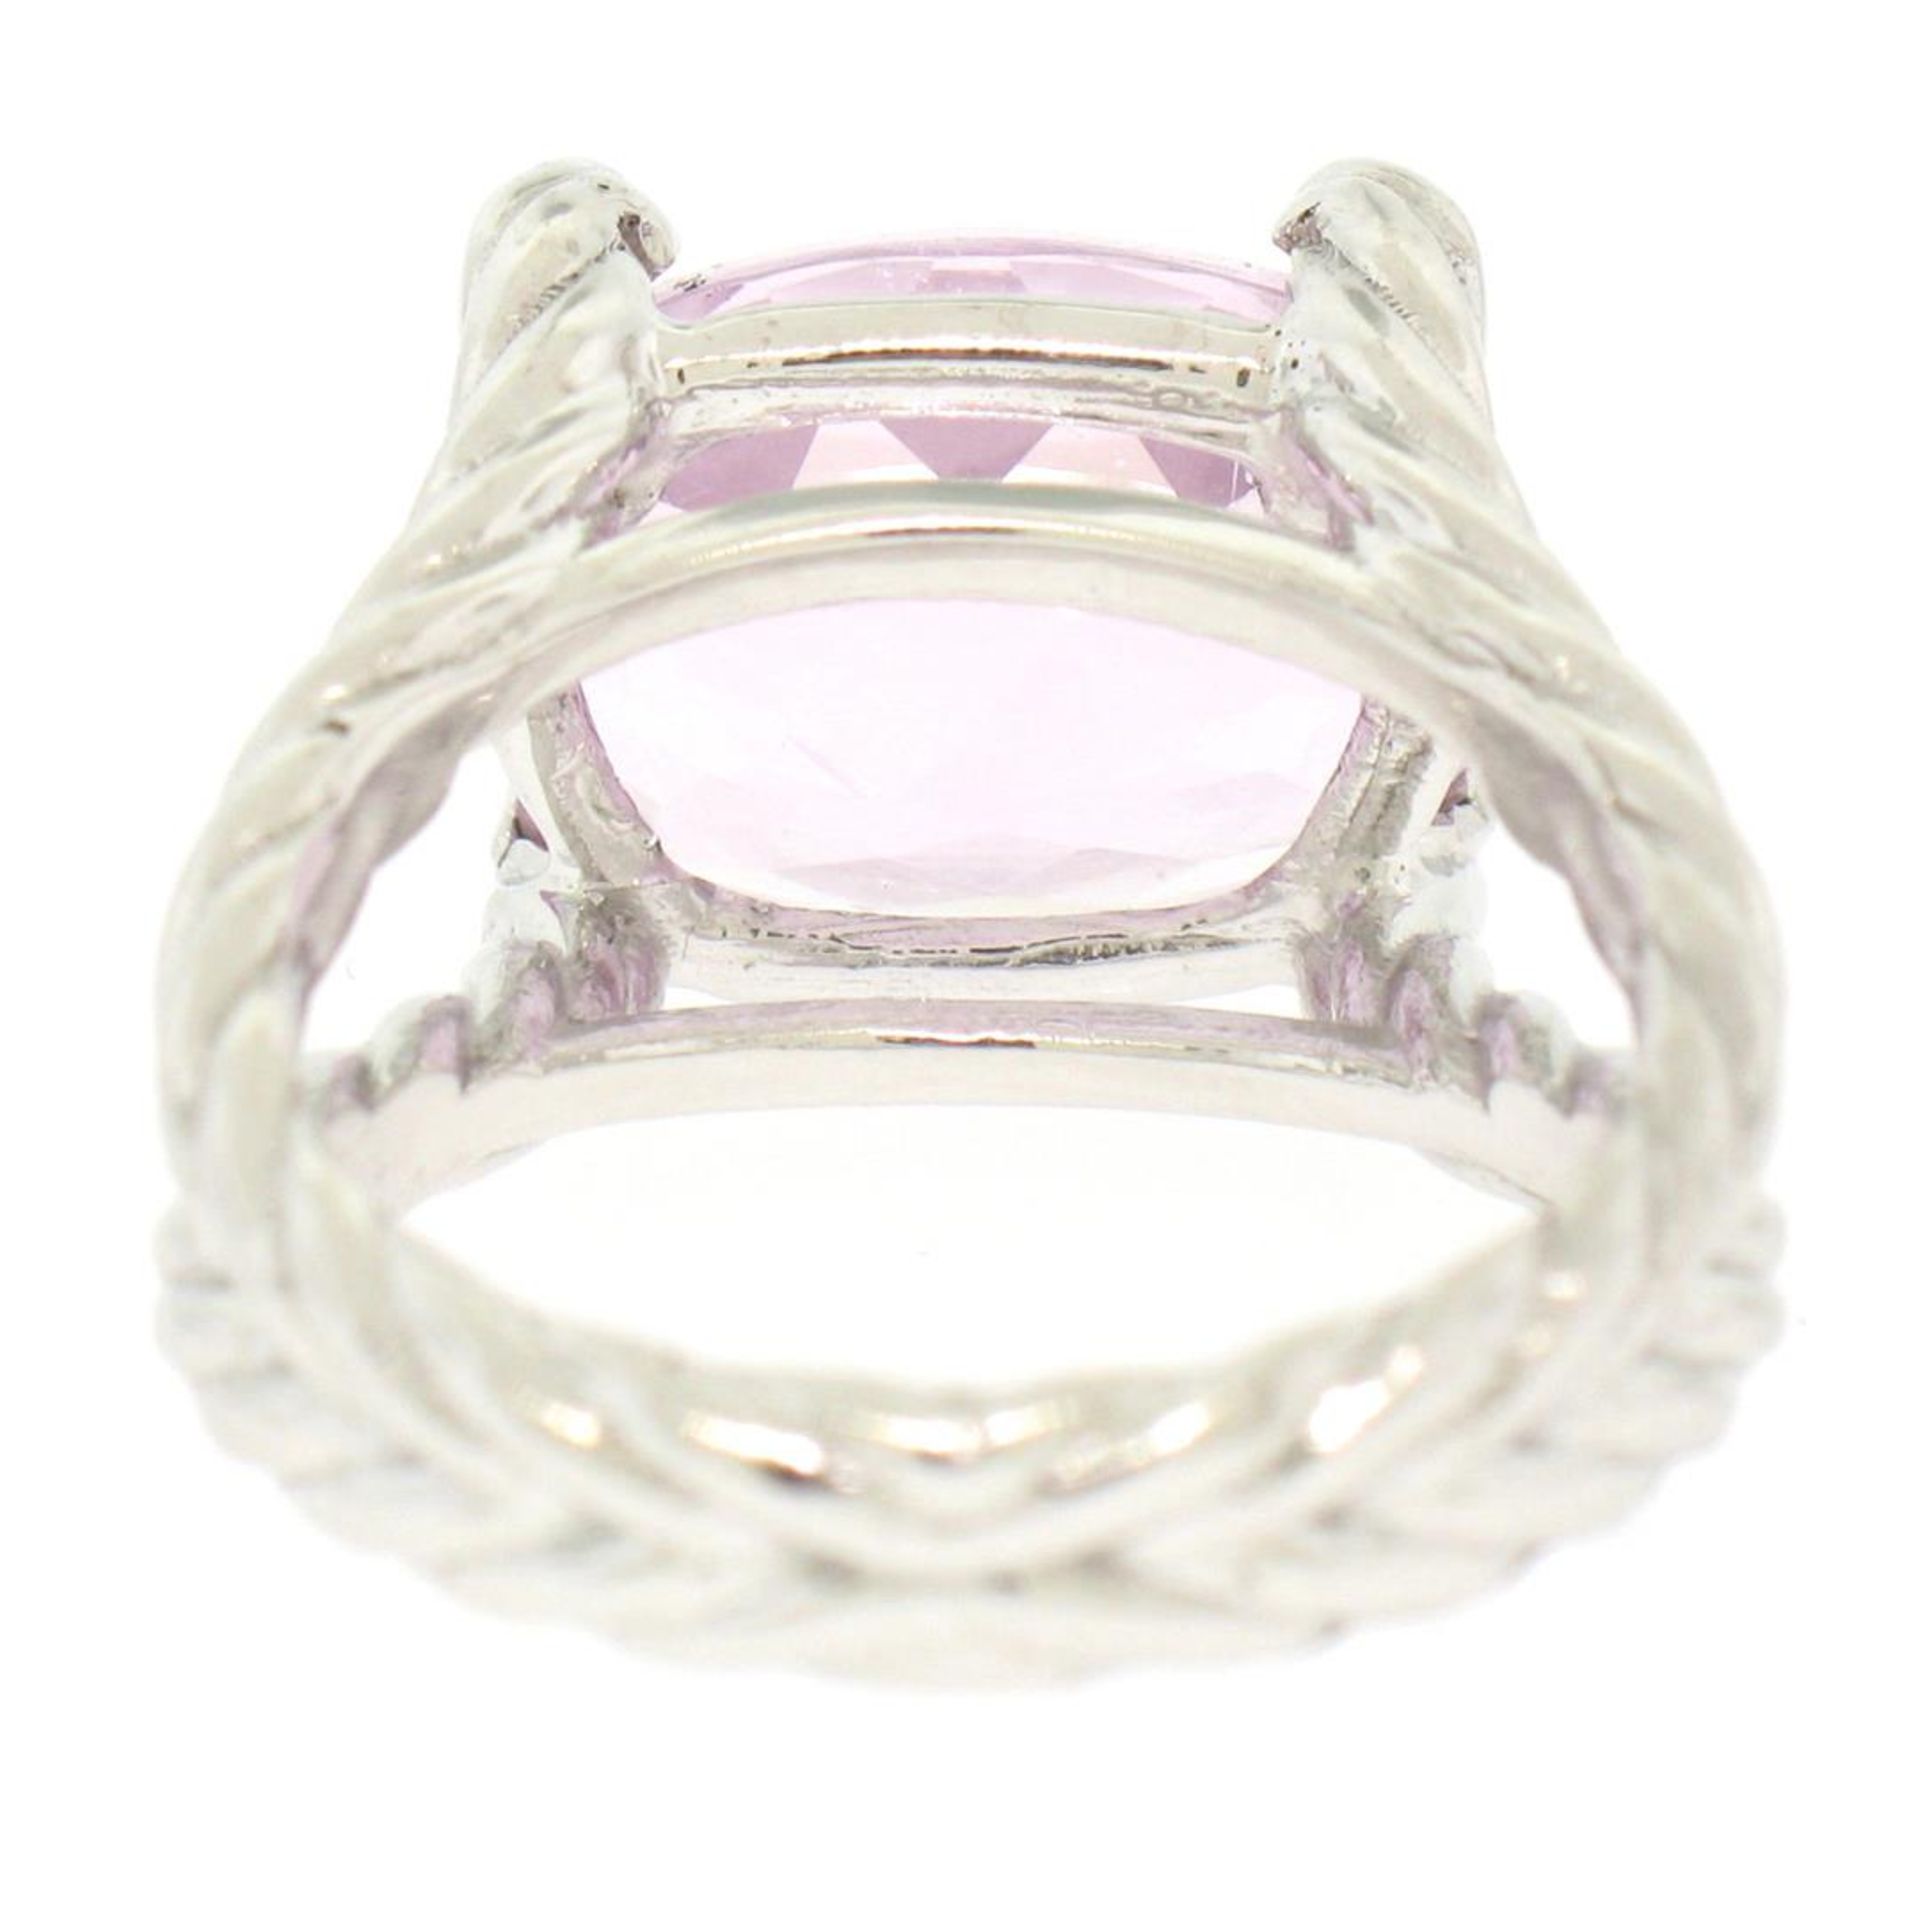 14k White Gold Twisted Cable 8.5 ct Oval Kunzite Solitaire Ring 4 Diamond Accent - Image 4 of 8